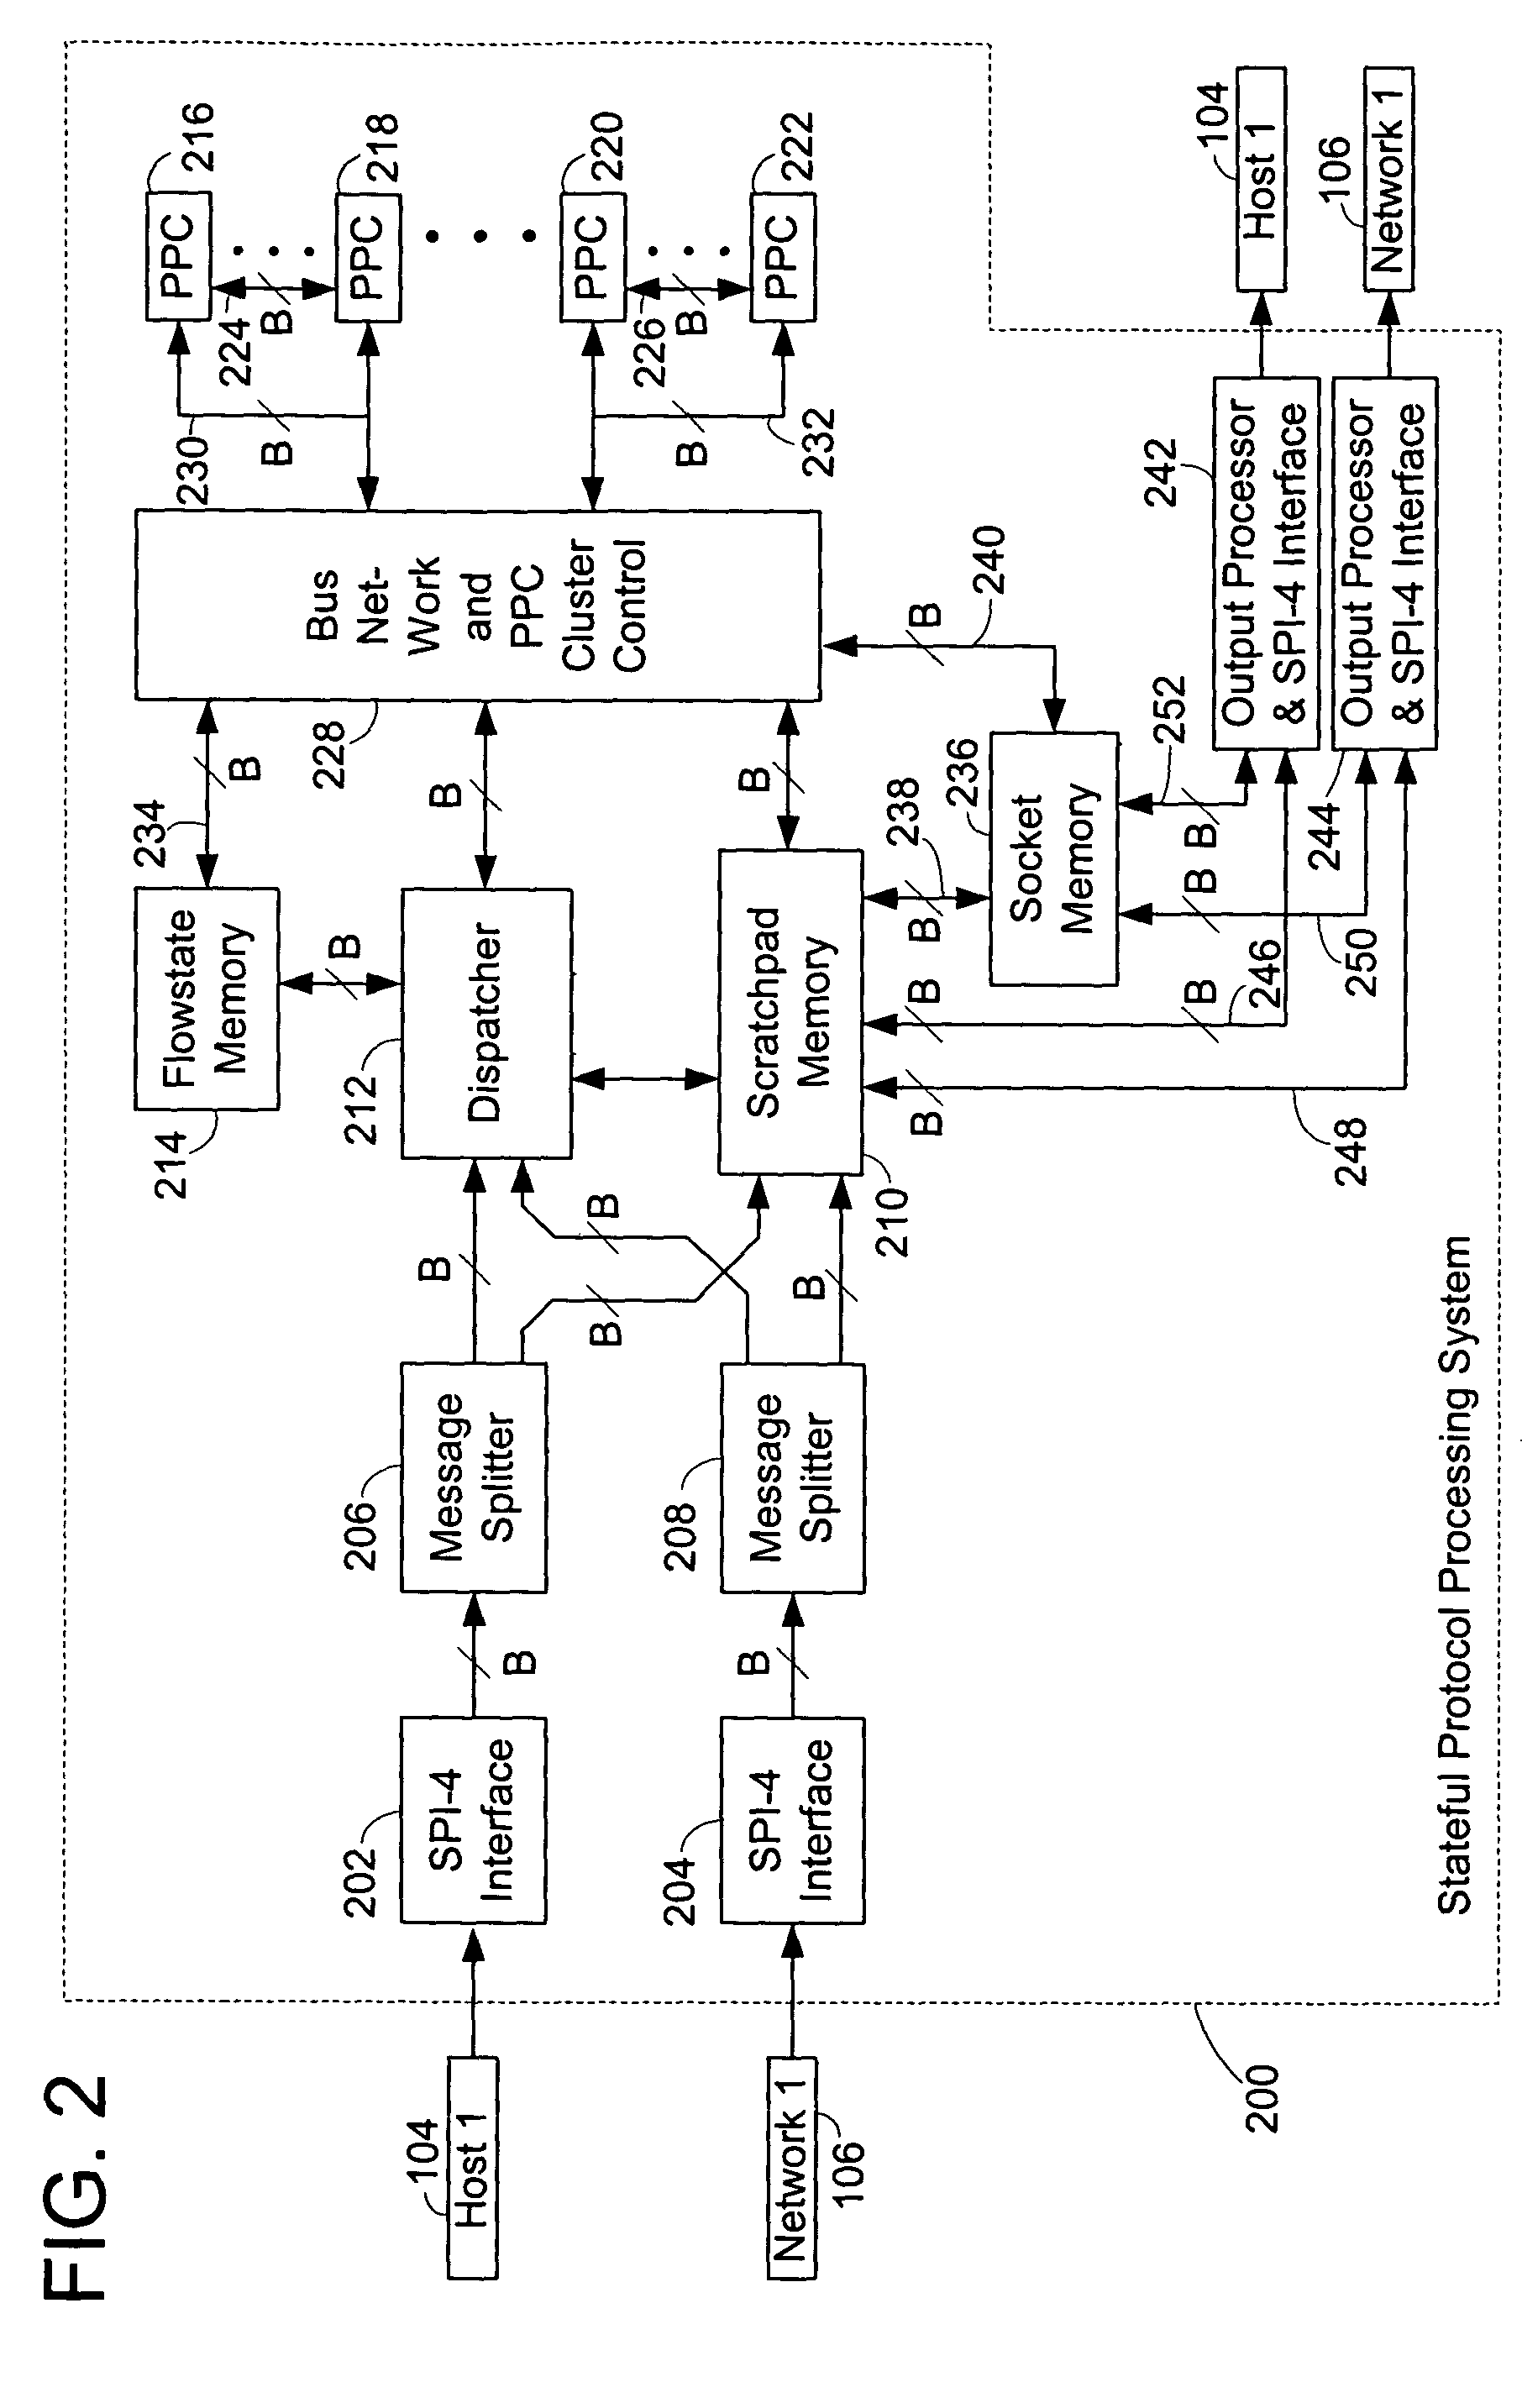 Multi-protocol and multi-format stateful processing